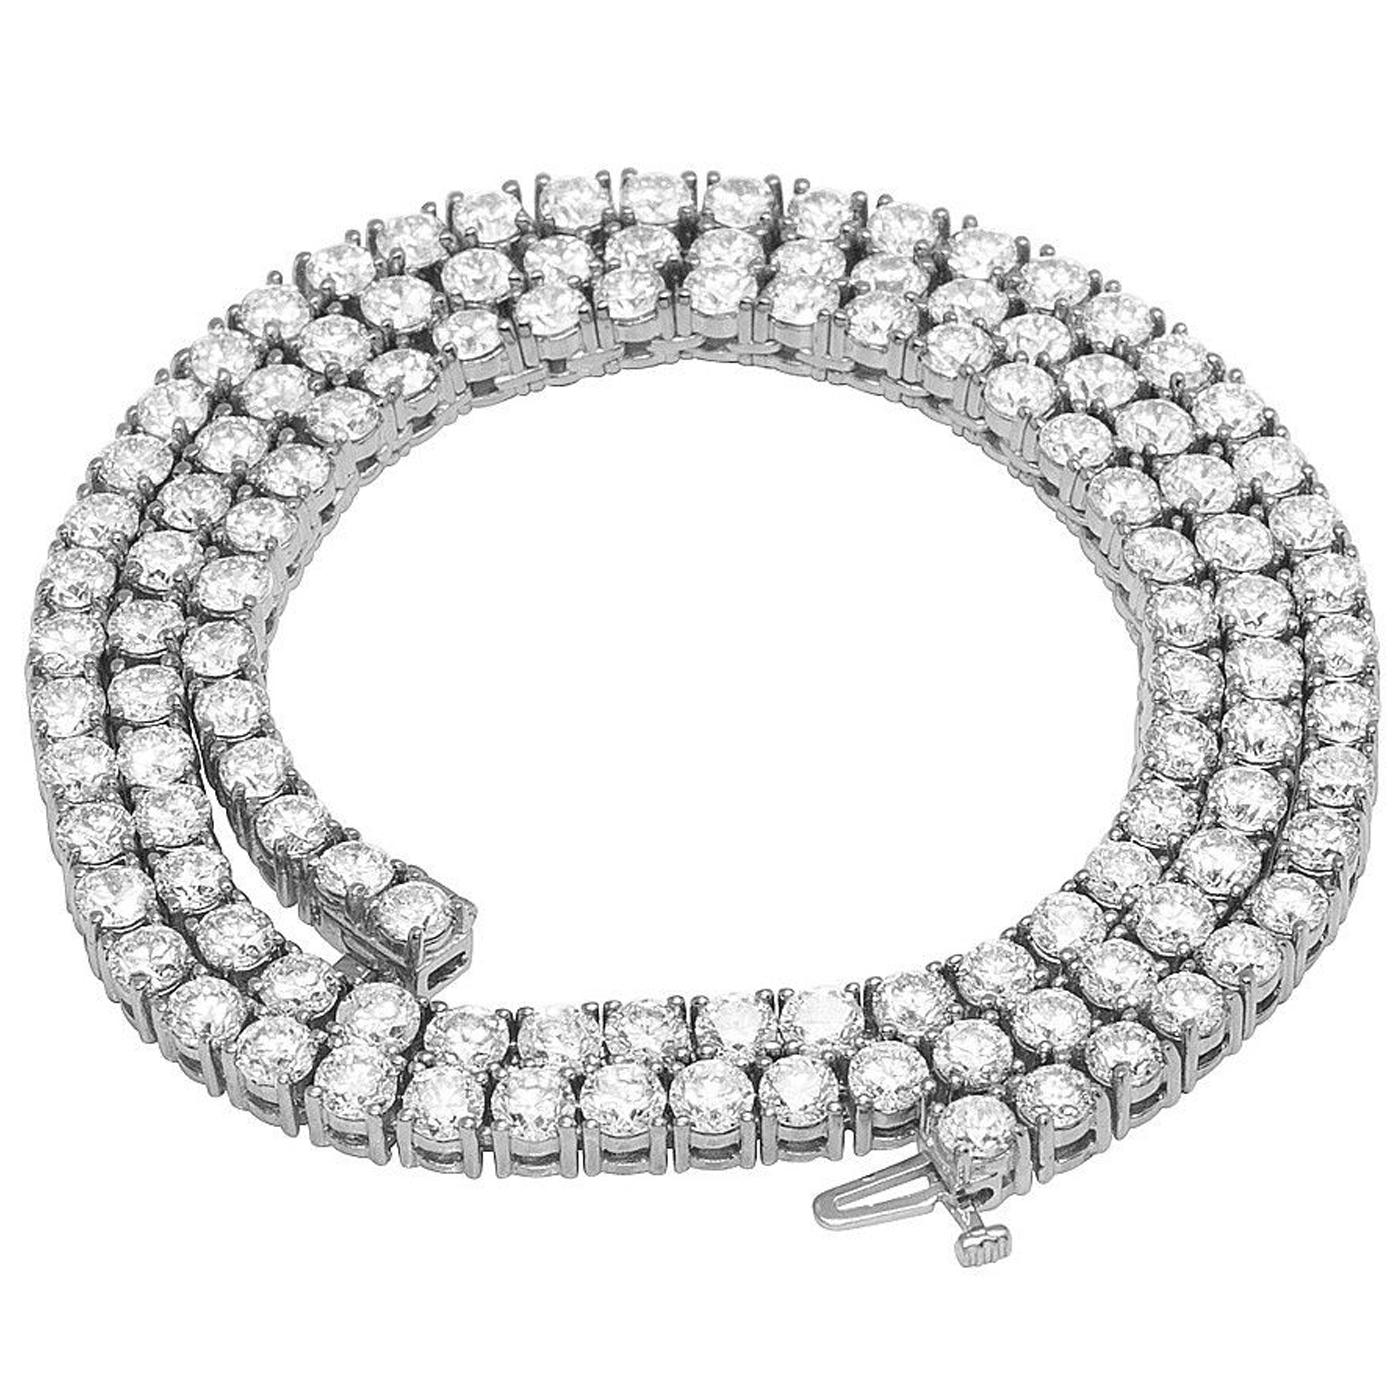 This Diamond Tennis Necklace Features 24.5 Ct of Round Diamonds. Beautiful tennis necklace made of diamonds. an essential piece of jewelry. in 14-karat white gold. The delicate 4-prong in-line chain on this tennis necklace is encrusted with